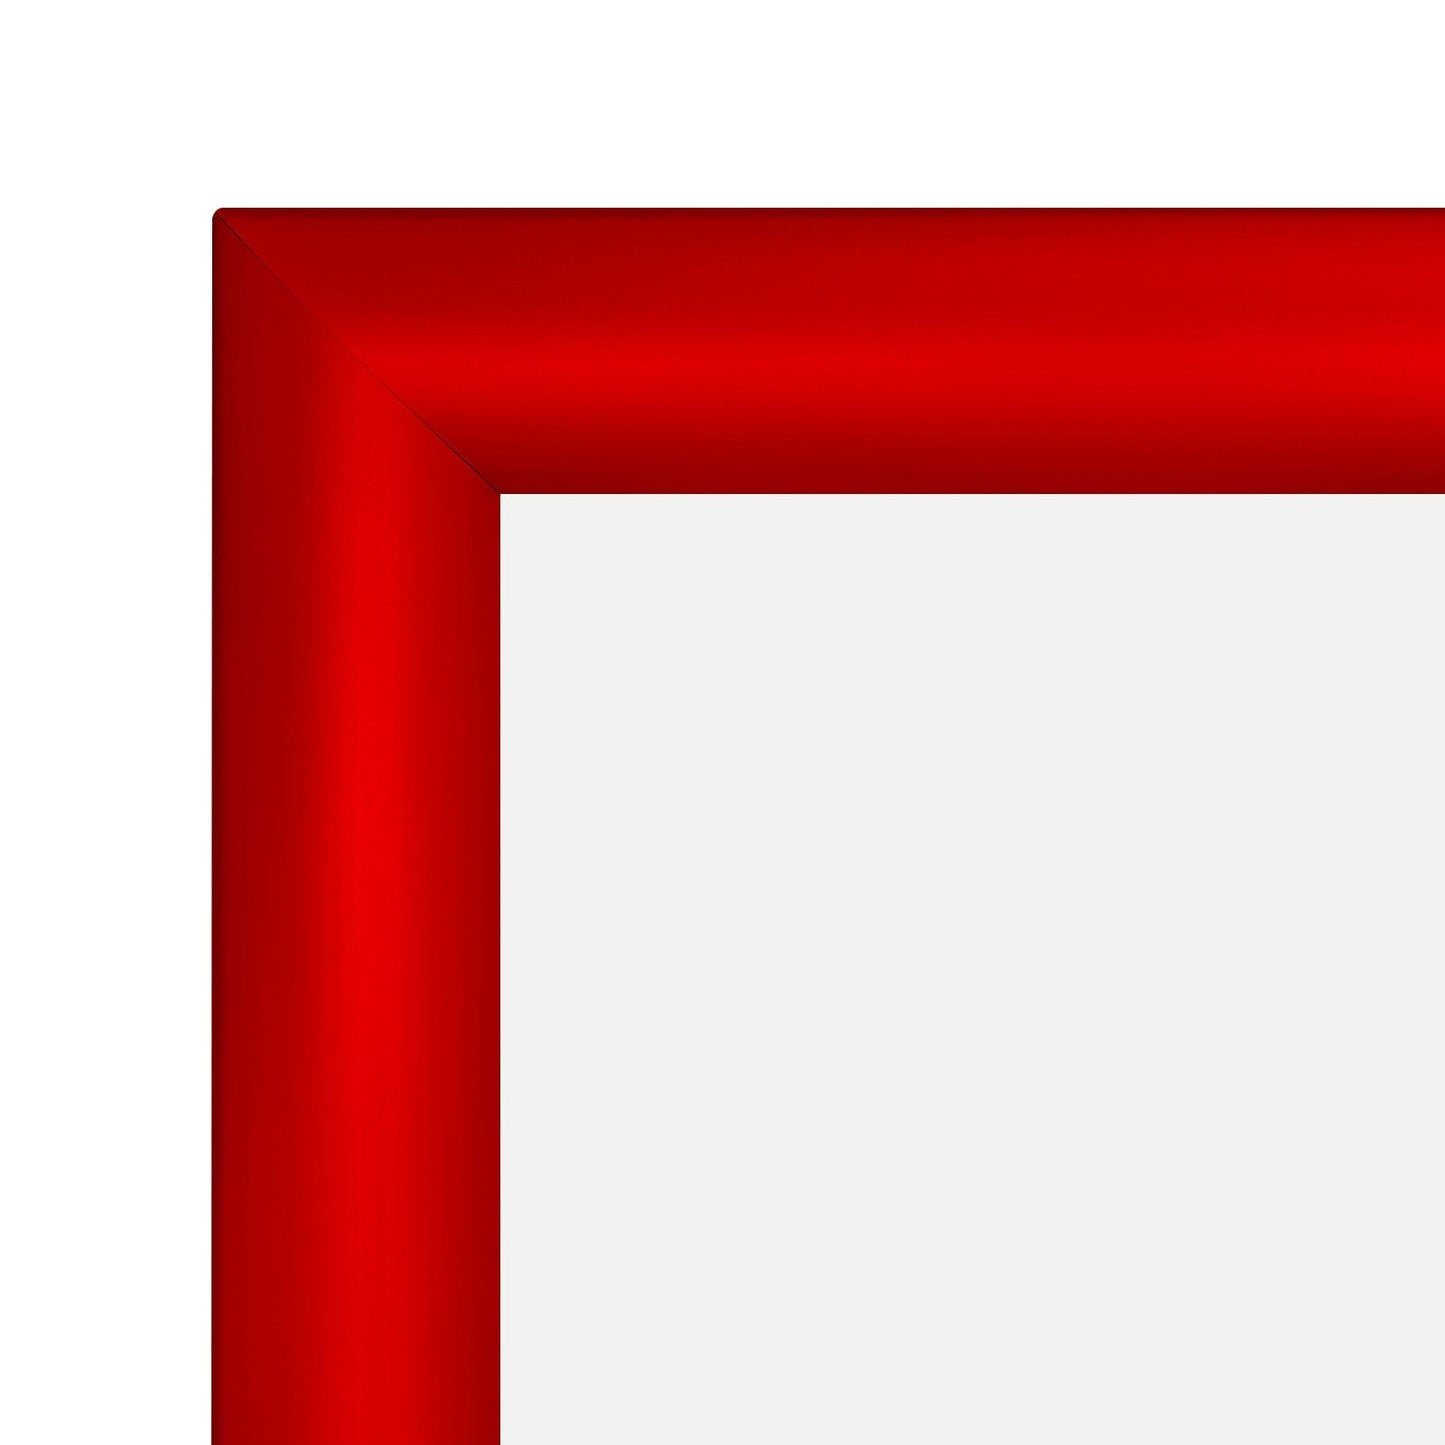 20x26 Red SnapeZo® Snap Frame - 1.2" Profile - Snap Frames Direct